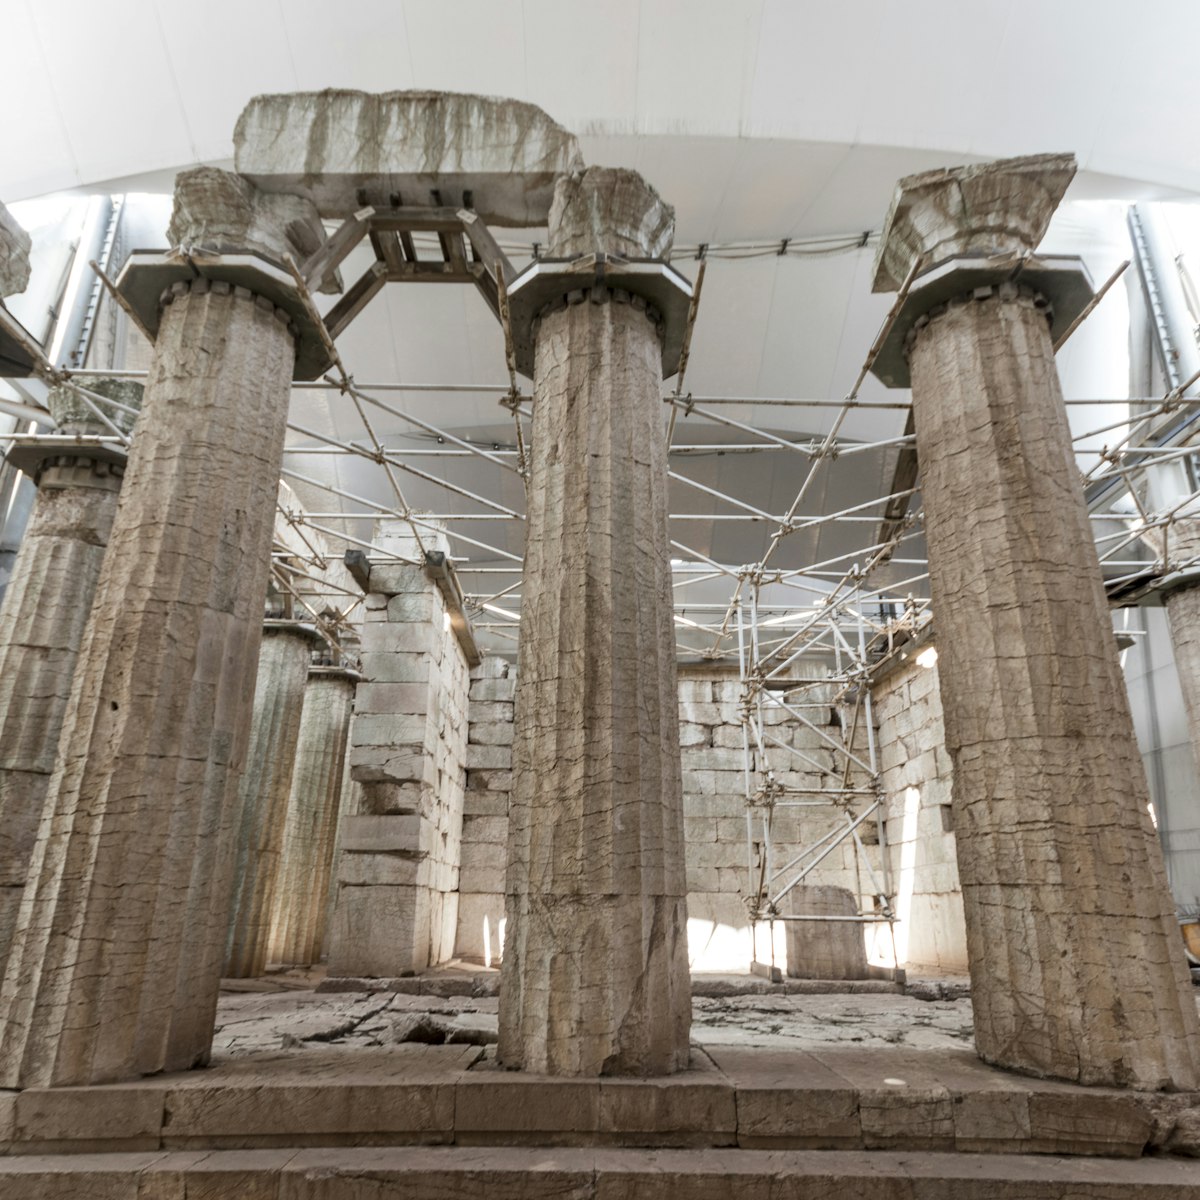 Ruined columns of the Temple of Apollo Epicurius inside a tent, Bassae, Greece.